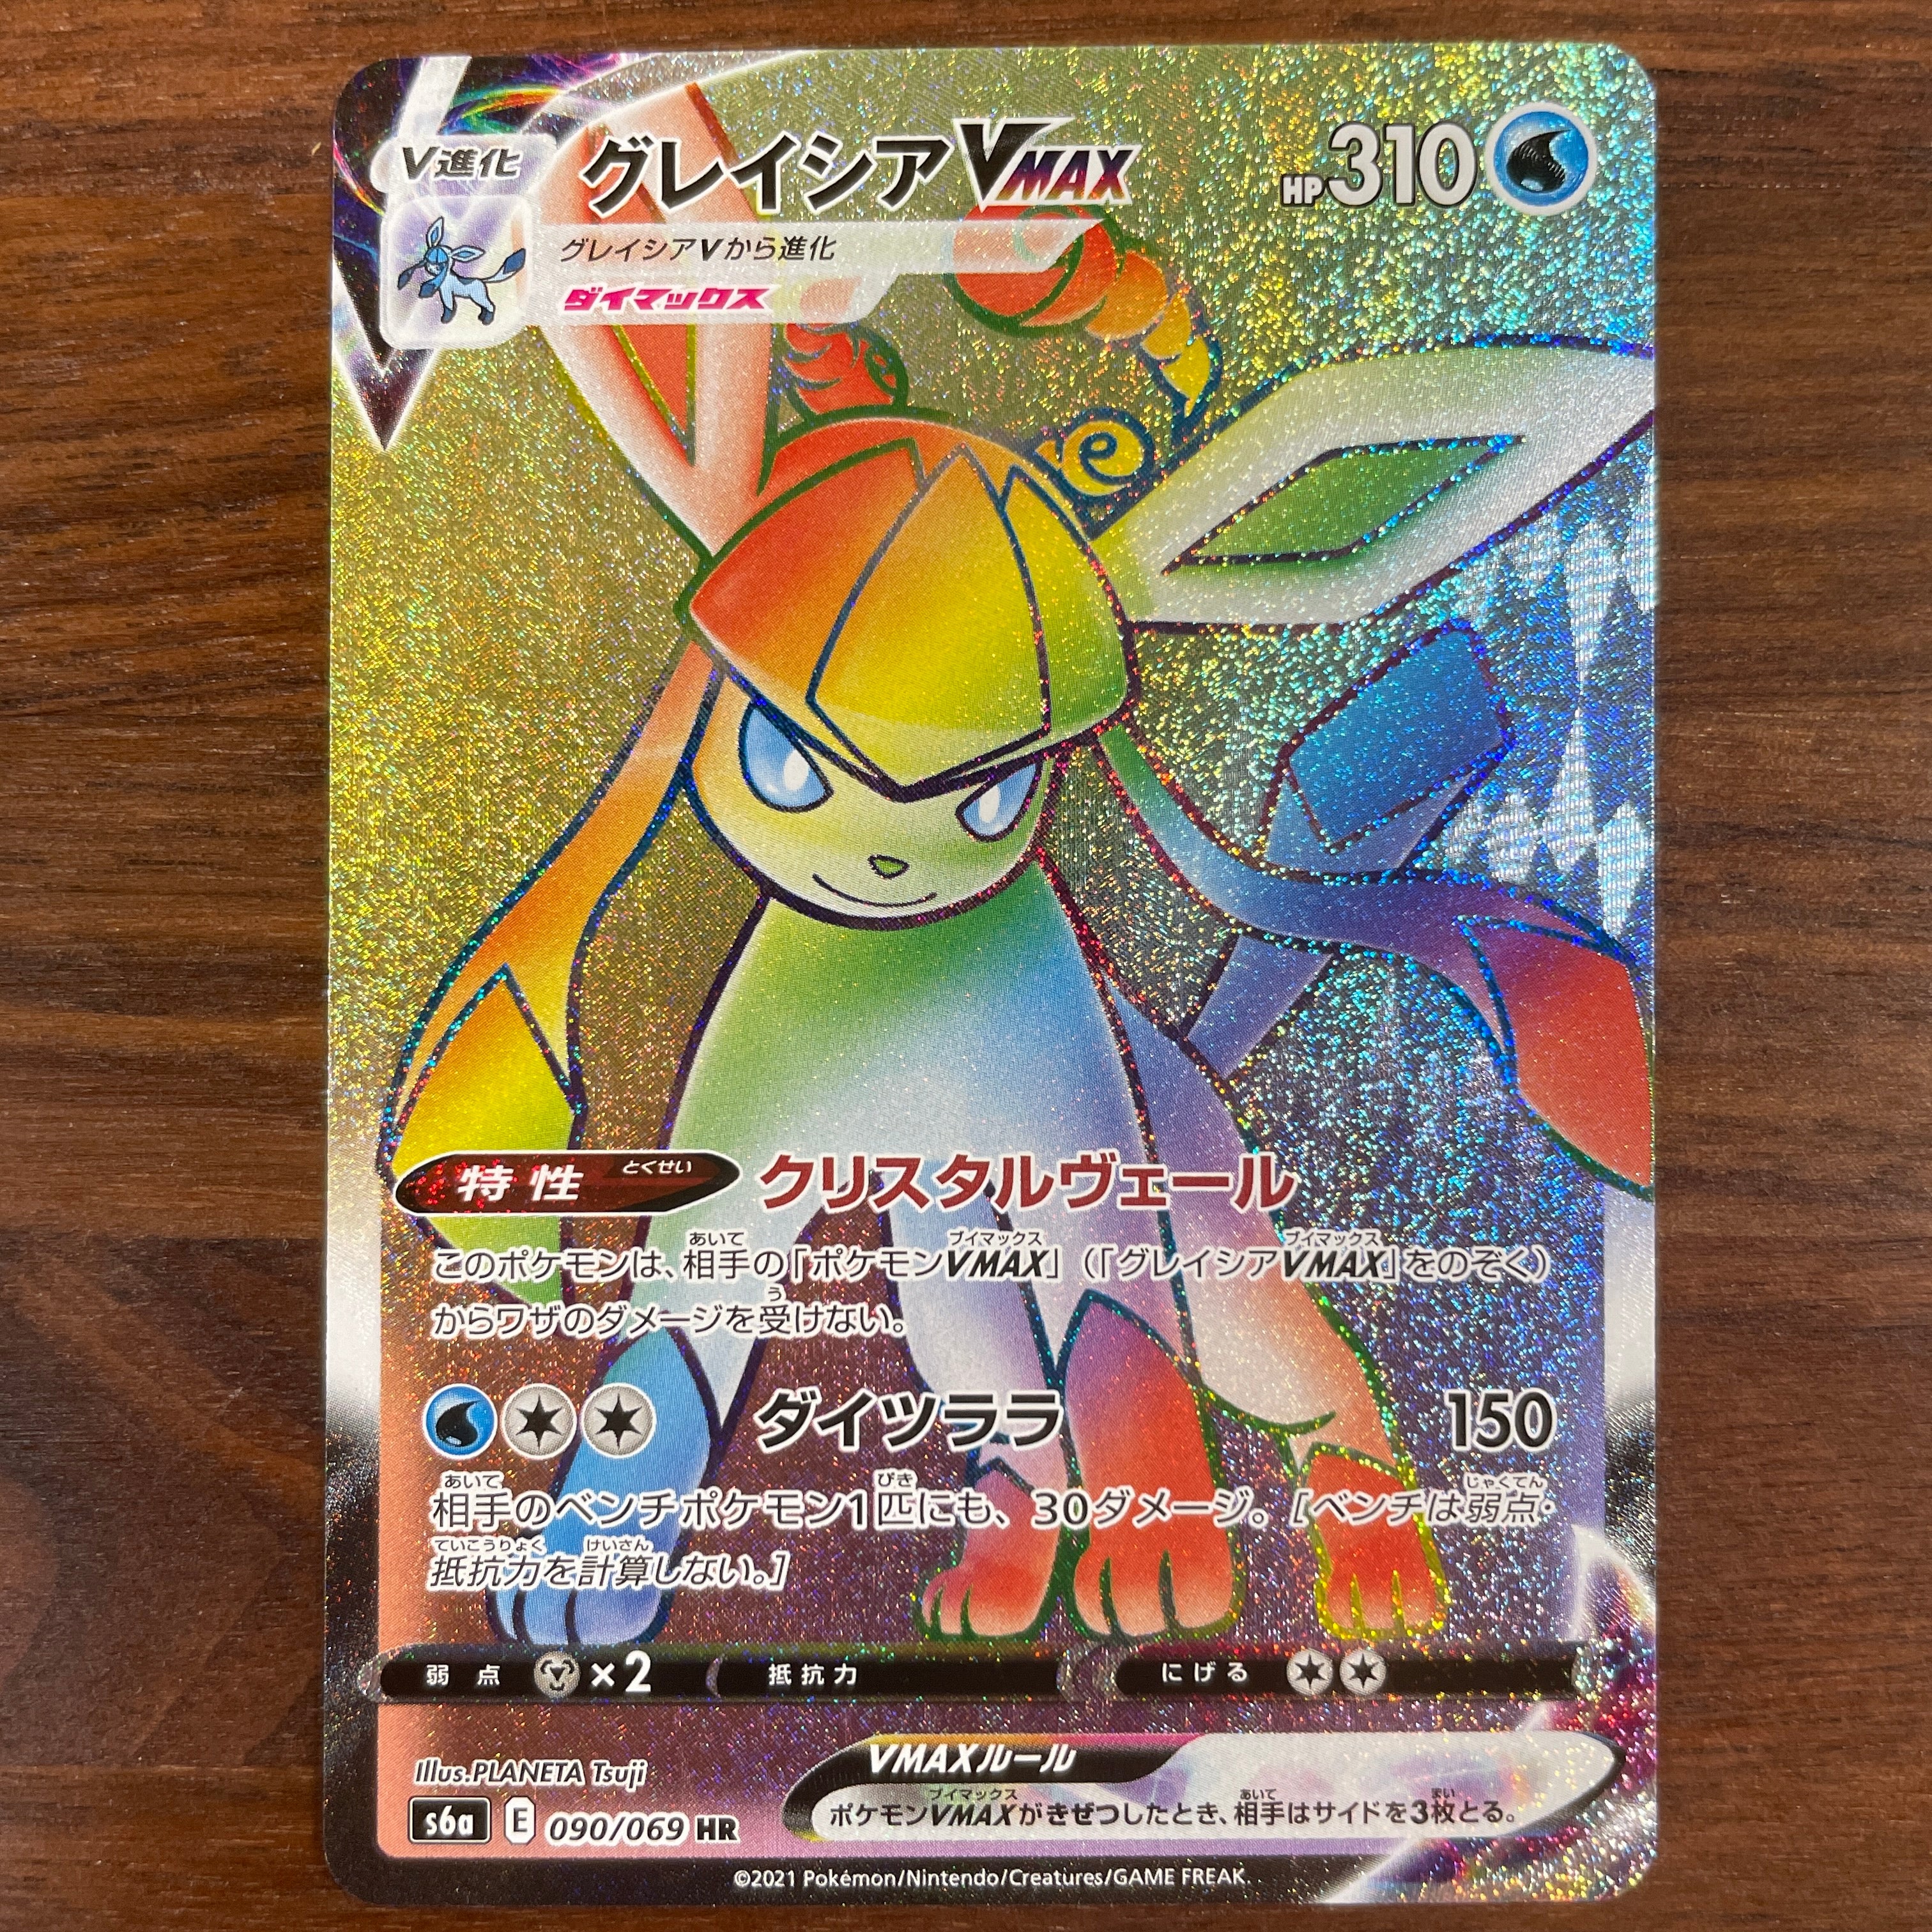 POKÉMON CARD GAME Sword & Shield Expansion pack ｢Eevee Heroes｣  POKÉMON CARD GAME s6a 090/069 Hyper Rare card  Glaceon VMAX